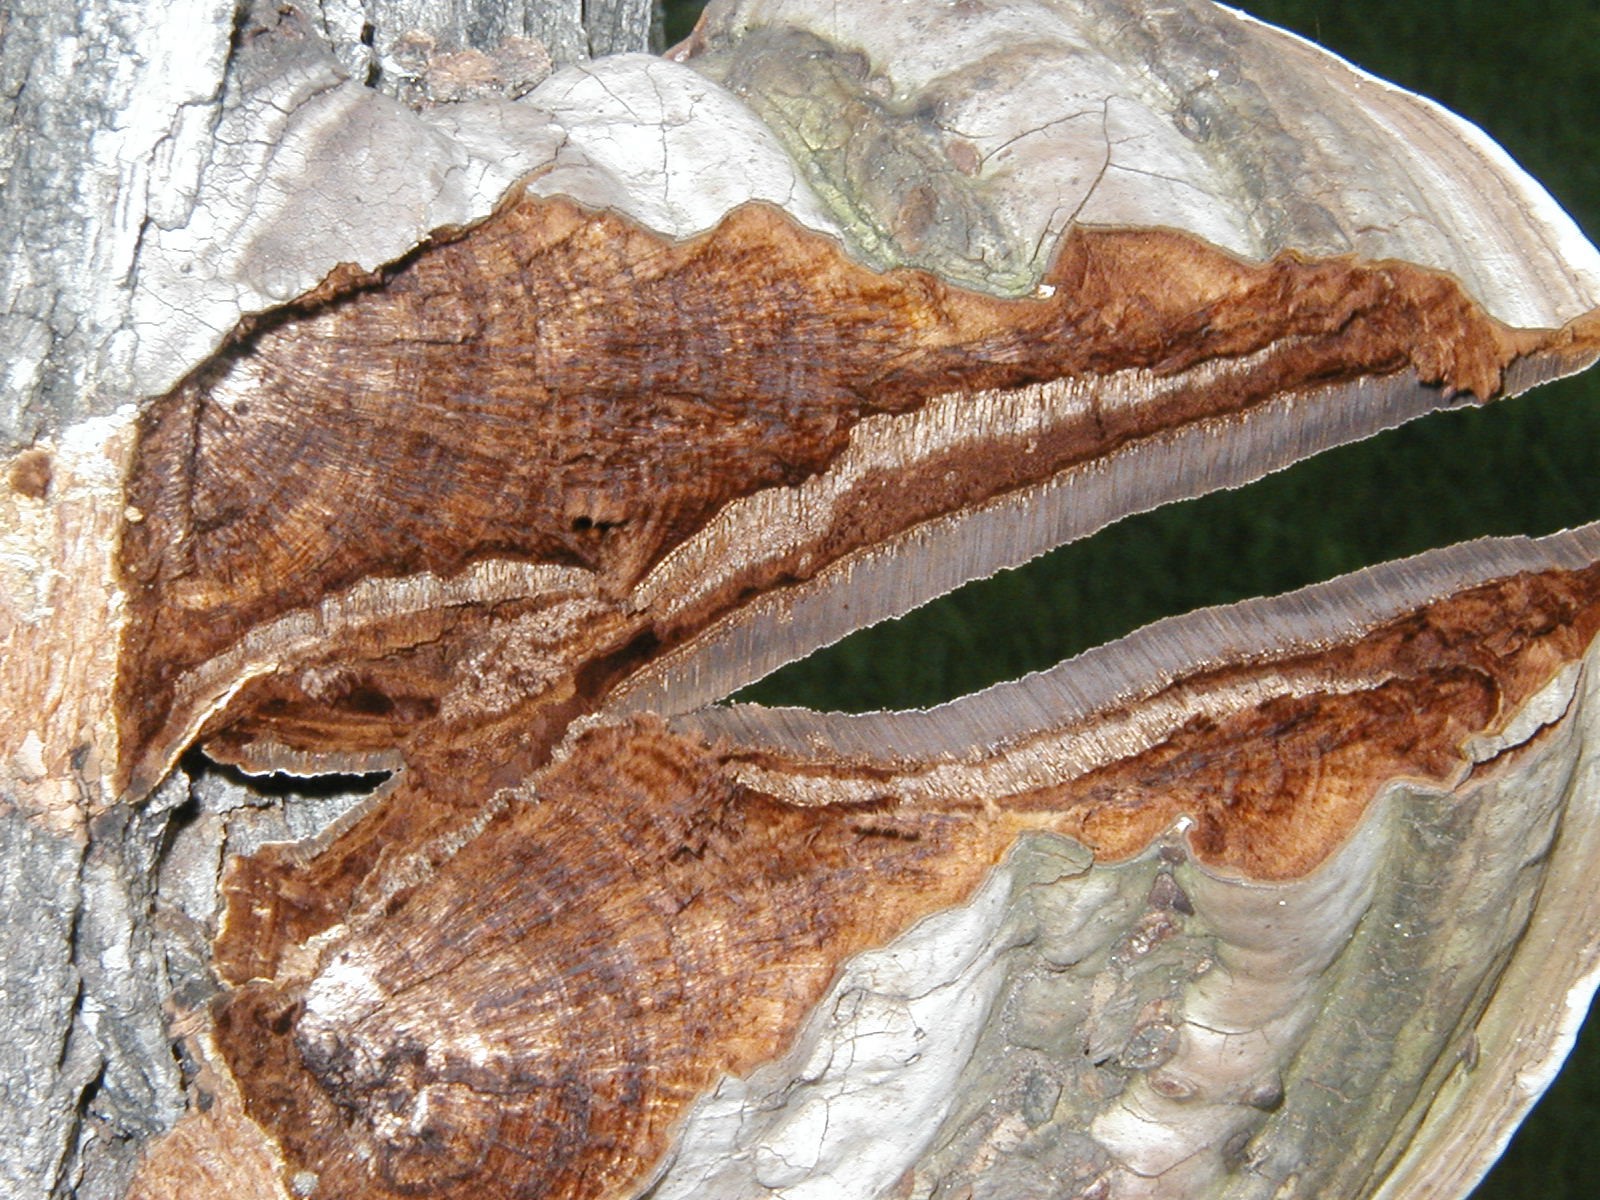 Photograph 9. Splitting a perennial conk to show the previous year’s pore layers that have been covered over by growth of a new pore layer. This conk is several years old. Red arrow points to current year’s pore layer and the green and yellow arrows previous year’s pore layers that are now filled with fungal growth.